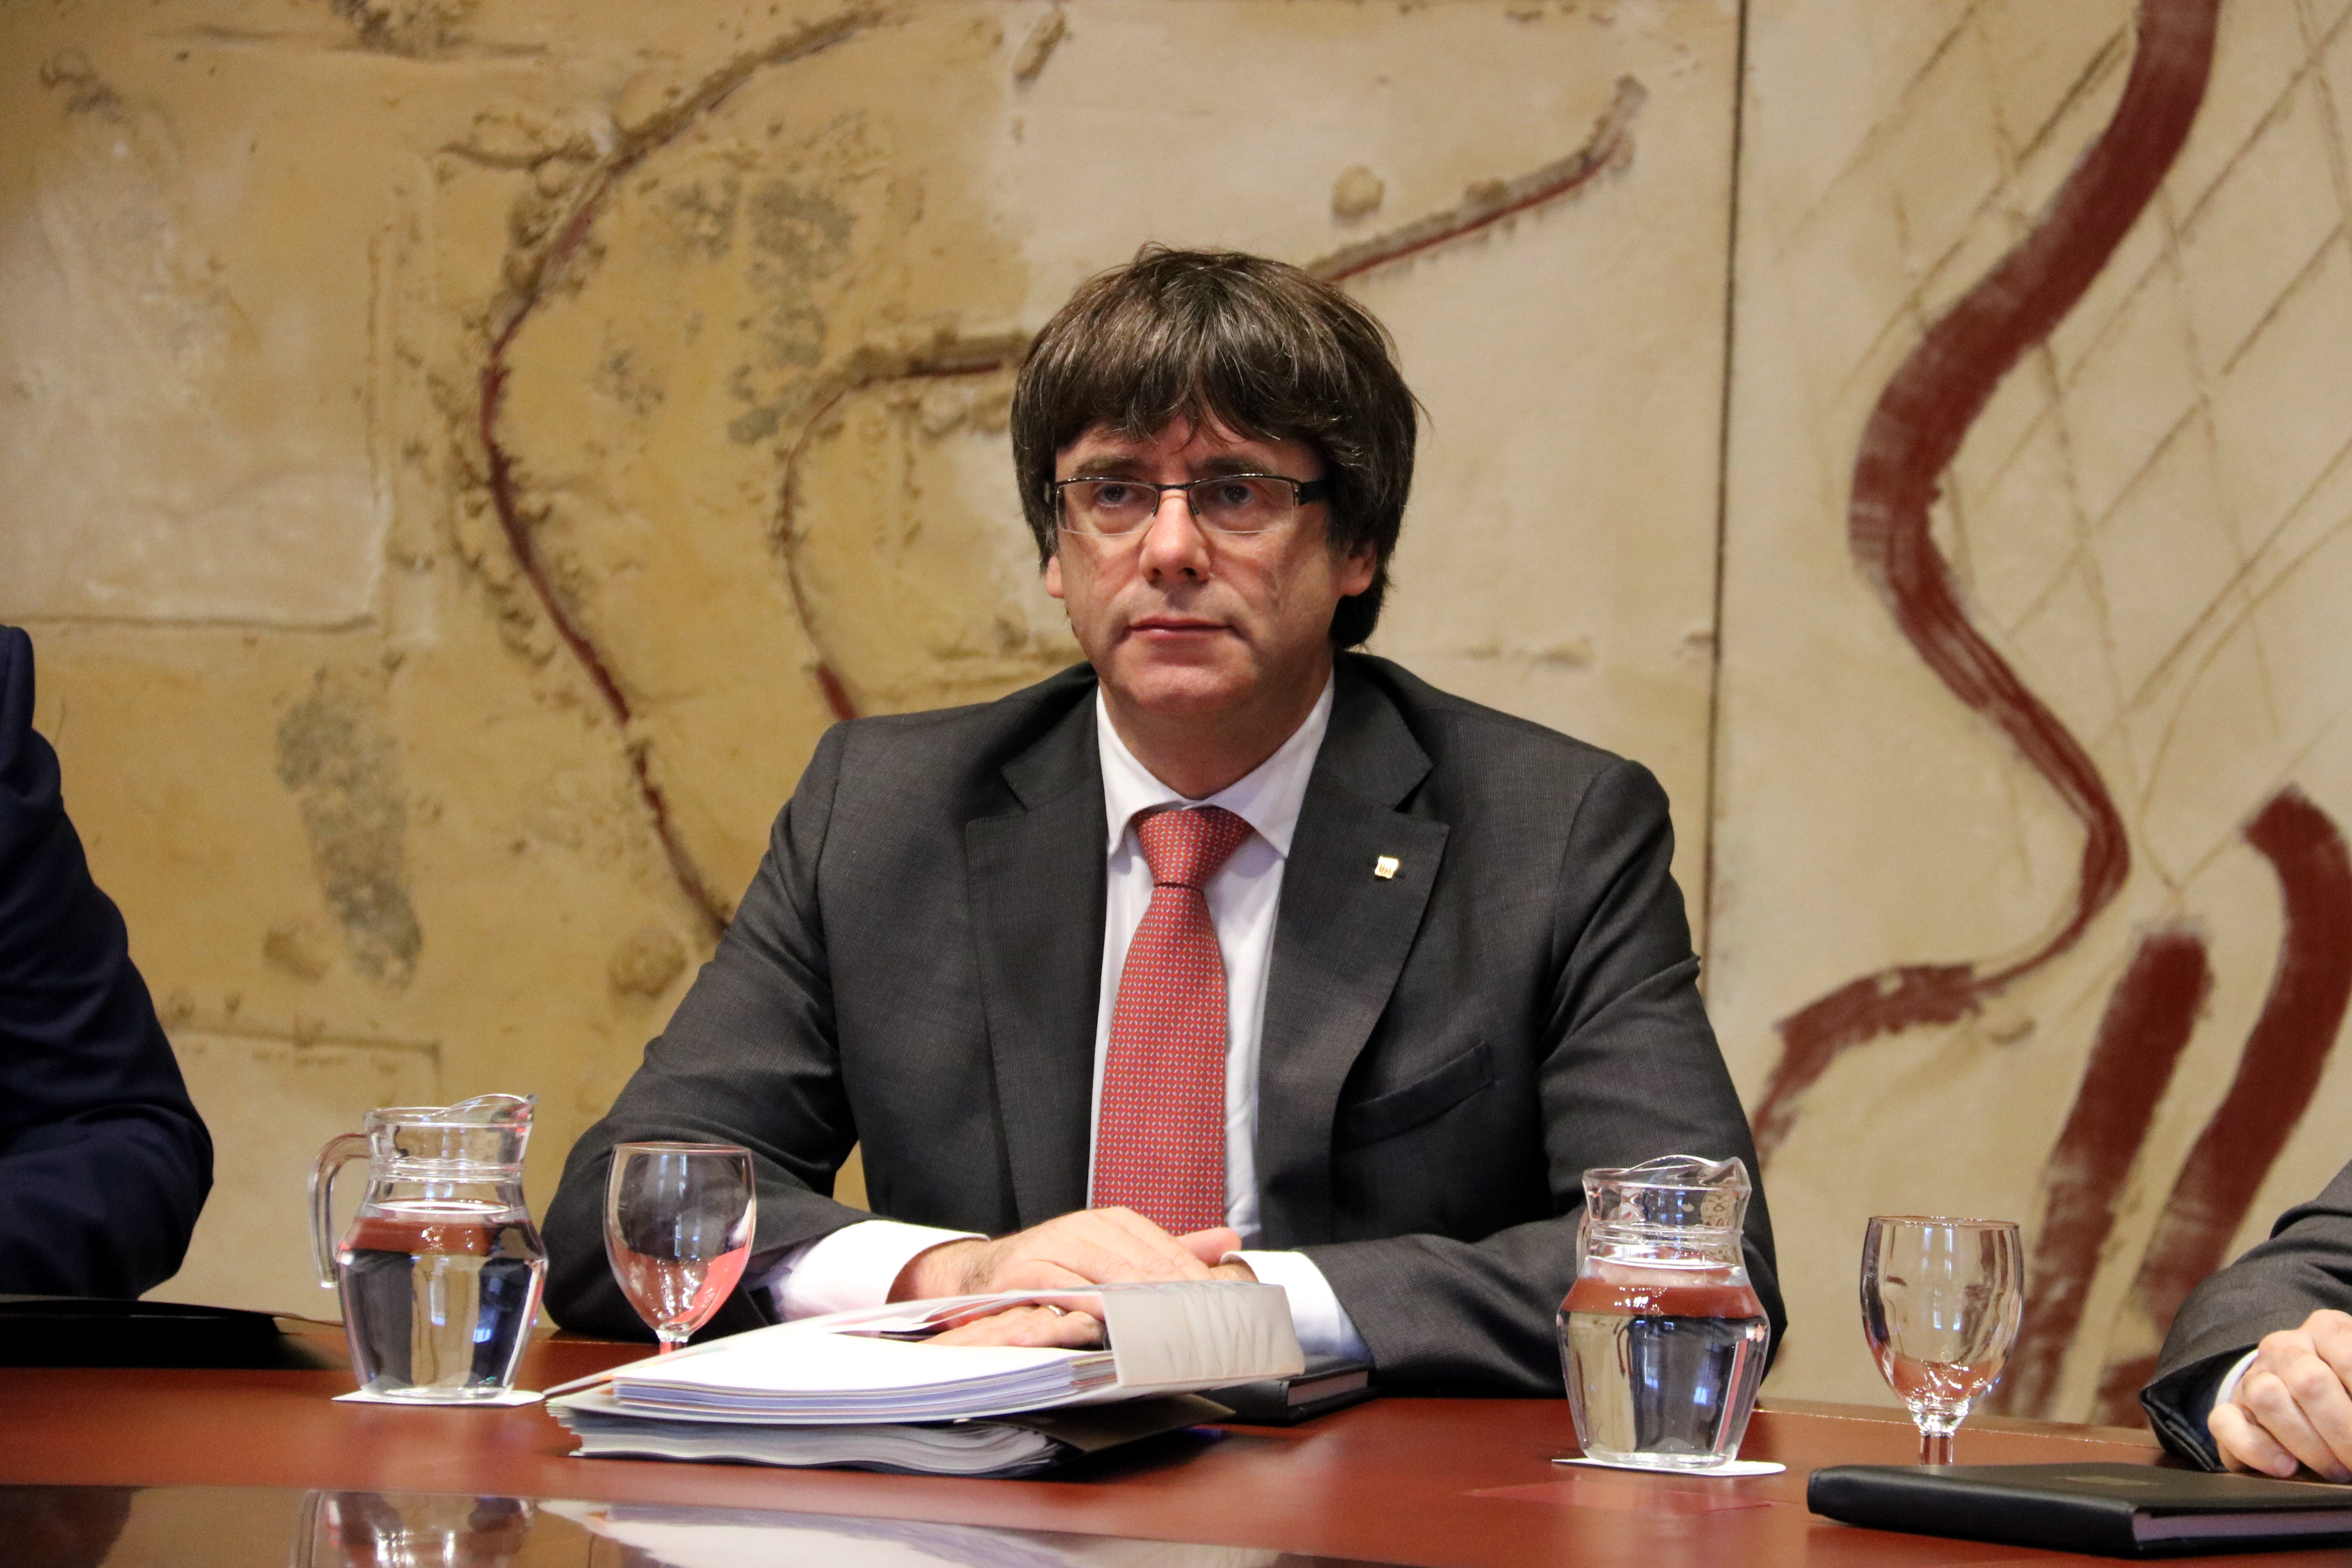 Carles Puigdemont at the Catalan government cabinet on October 24 2017 (by ACN)